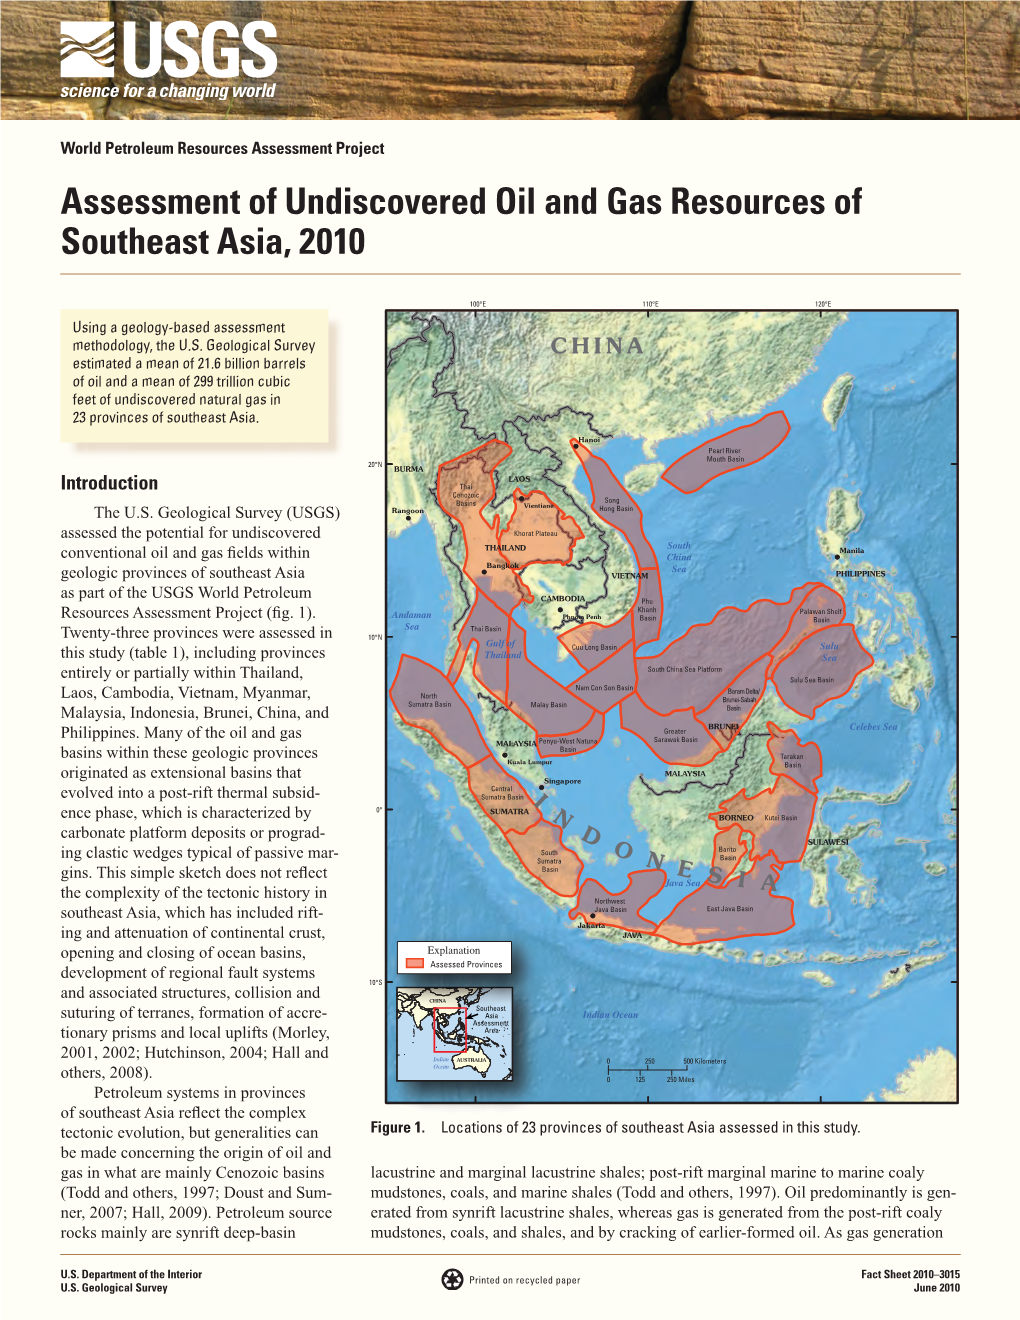 Assessment of Undiscovered Oil and Gas Resources of Southeast Asia, 2010